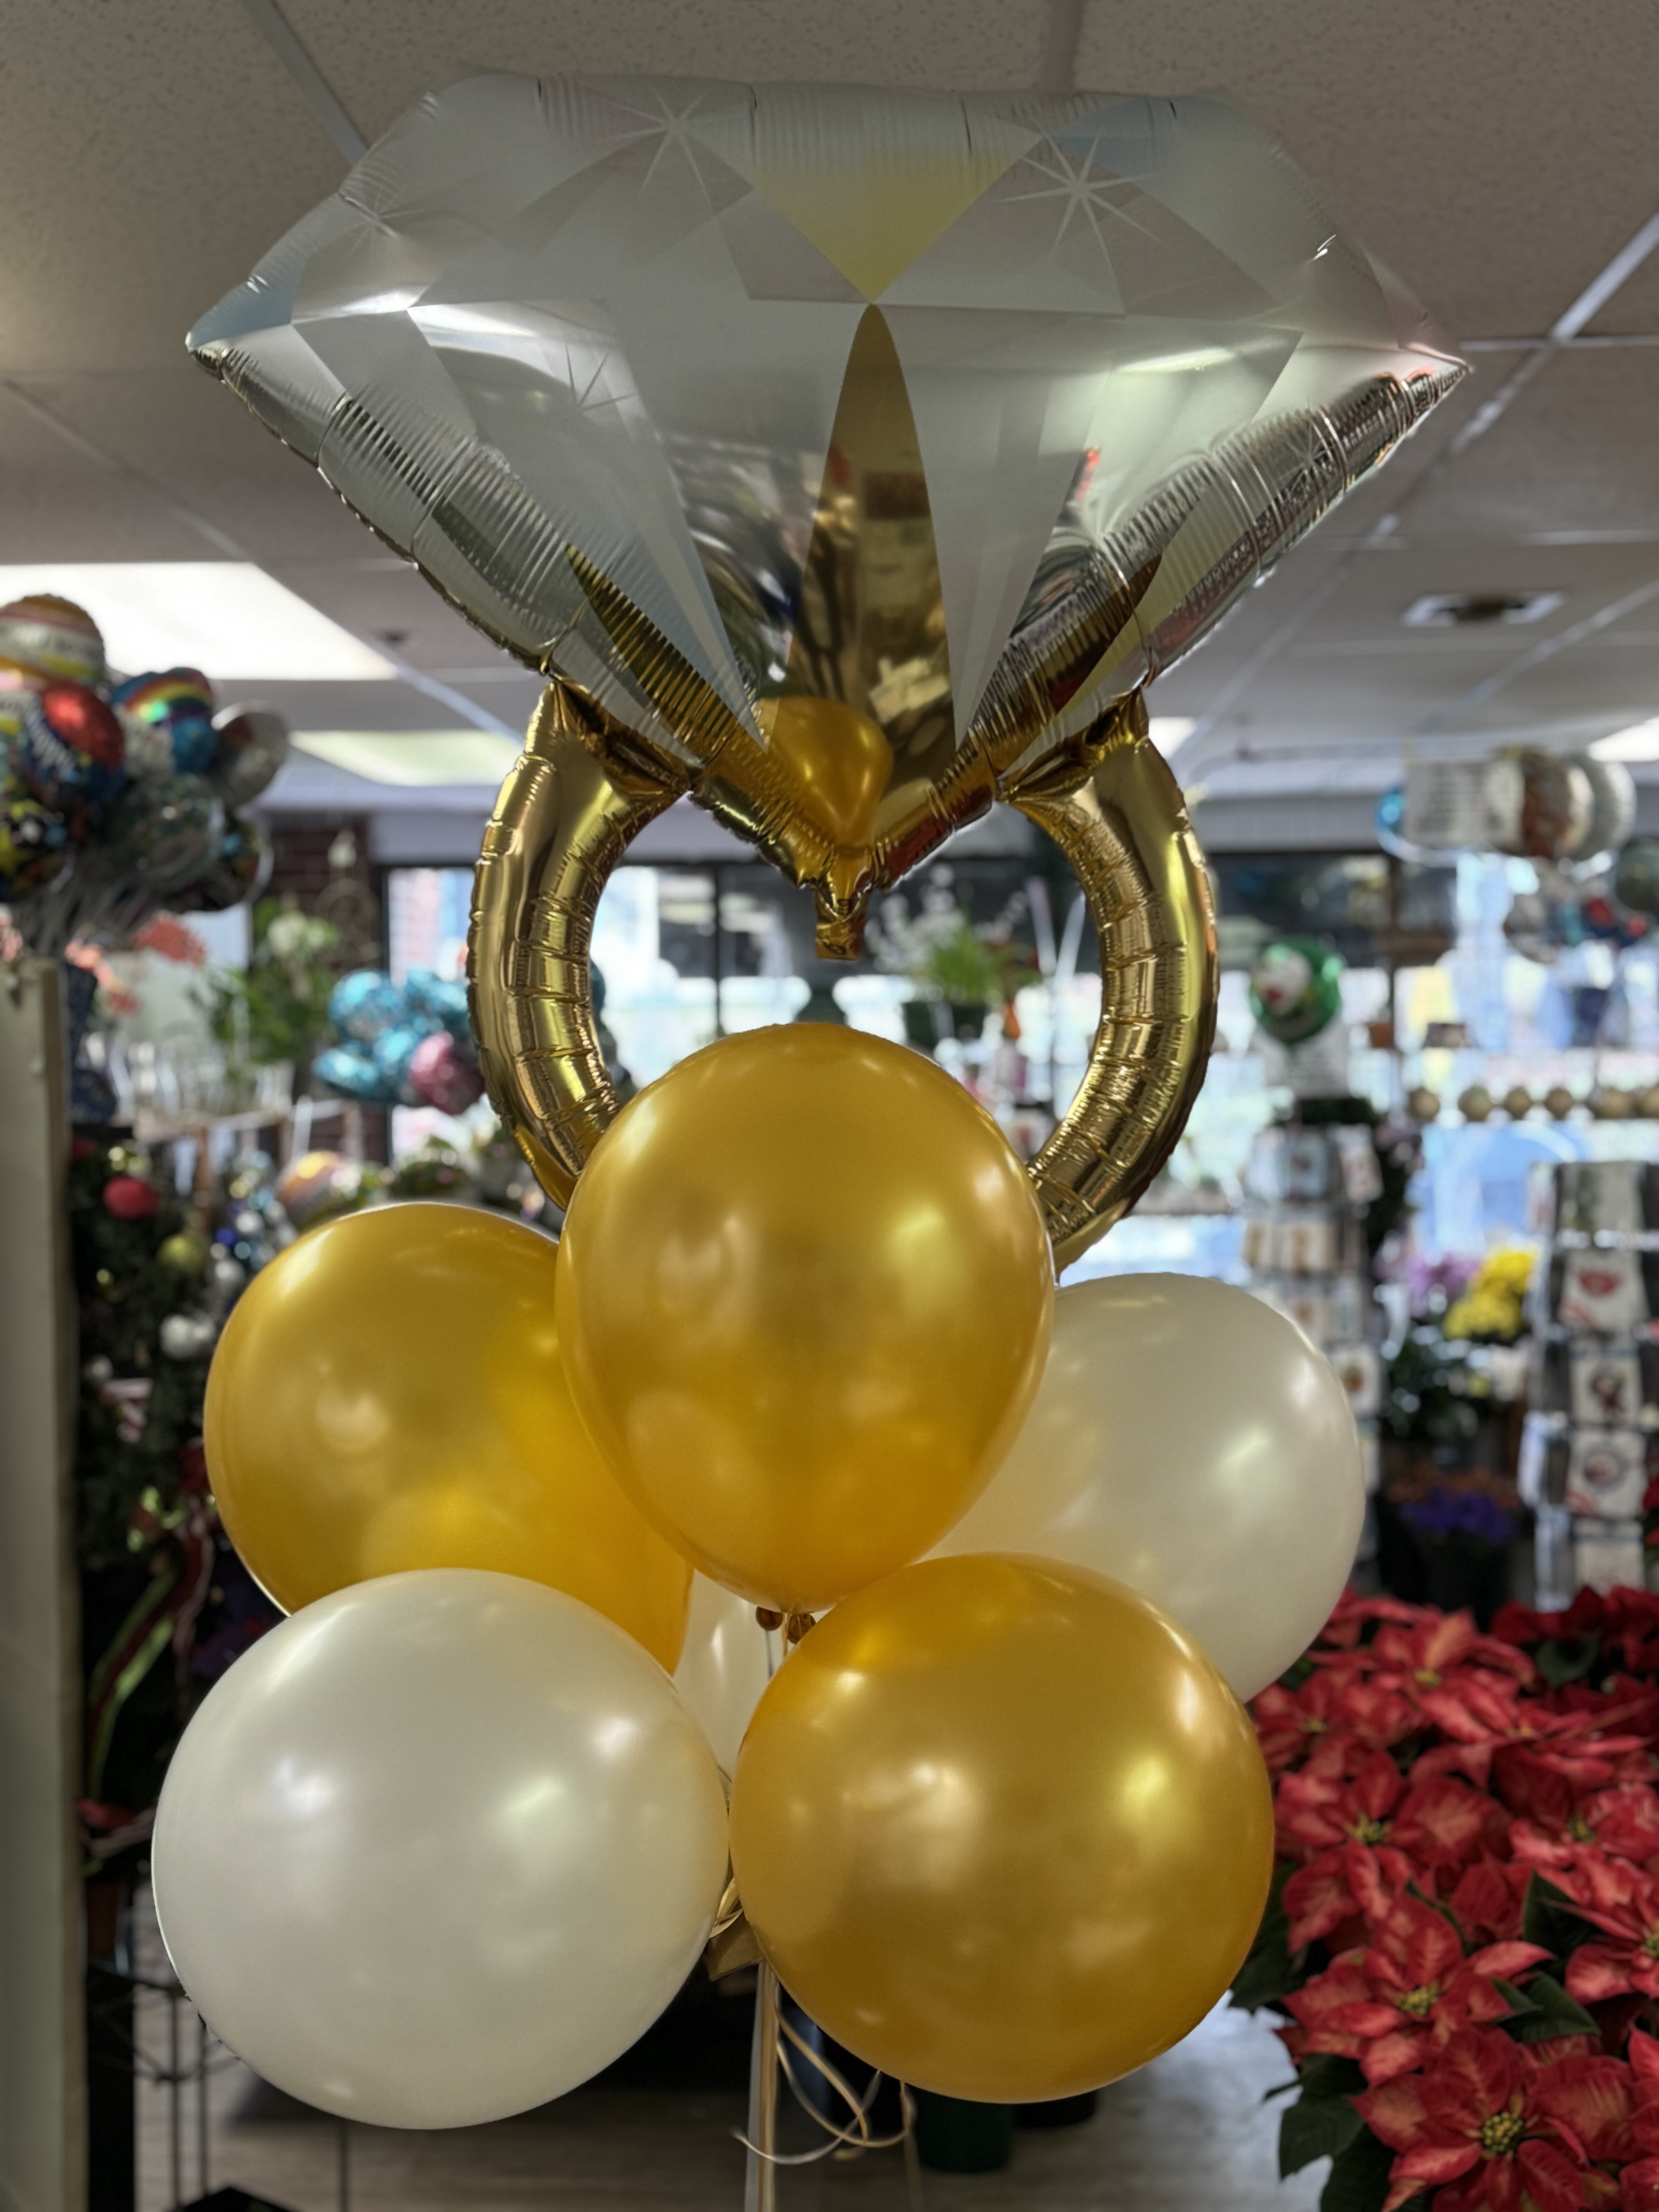 Marry Me? Diamond Ring Balloon Bouquet - Want them to say “I DO!”? Send this engagement ring balloon bouquet to get your answer! These are great for decorating for your special occasion! Local delivery or pick up only. 